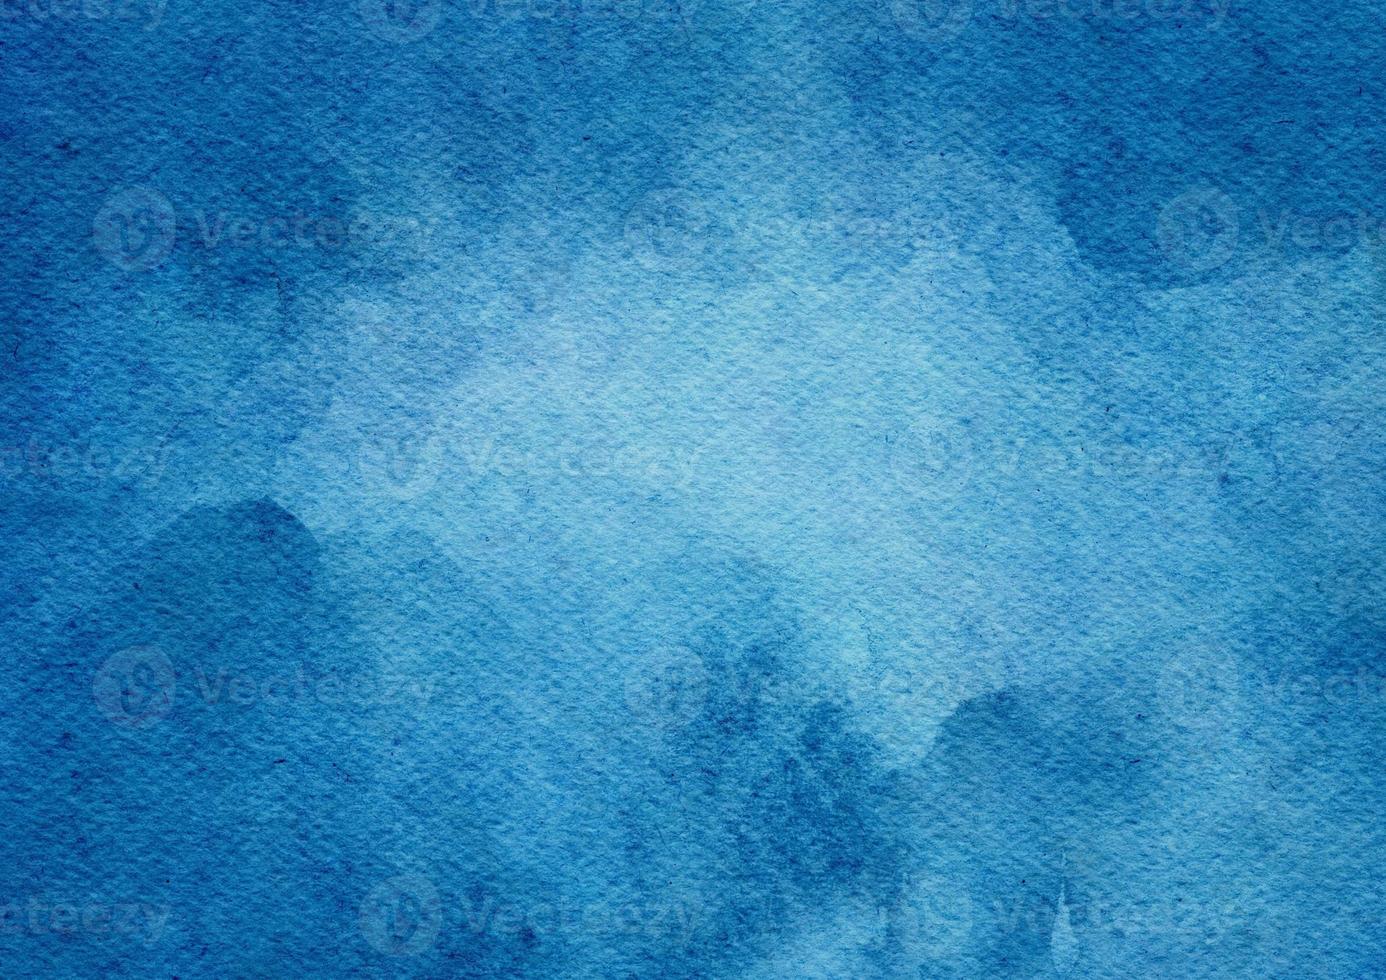 Blue watercolor pain on paper texture, Beautiful background with stain watercolor photo